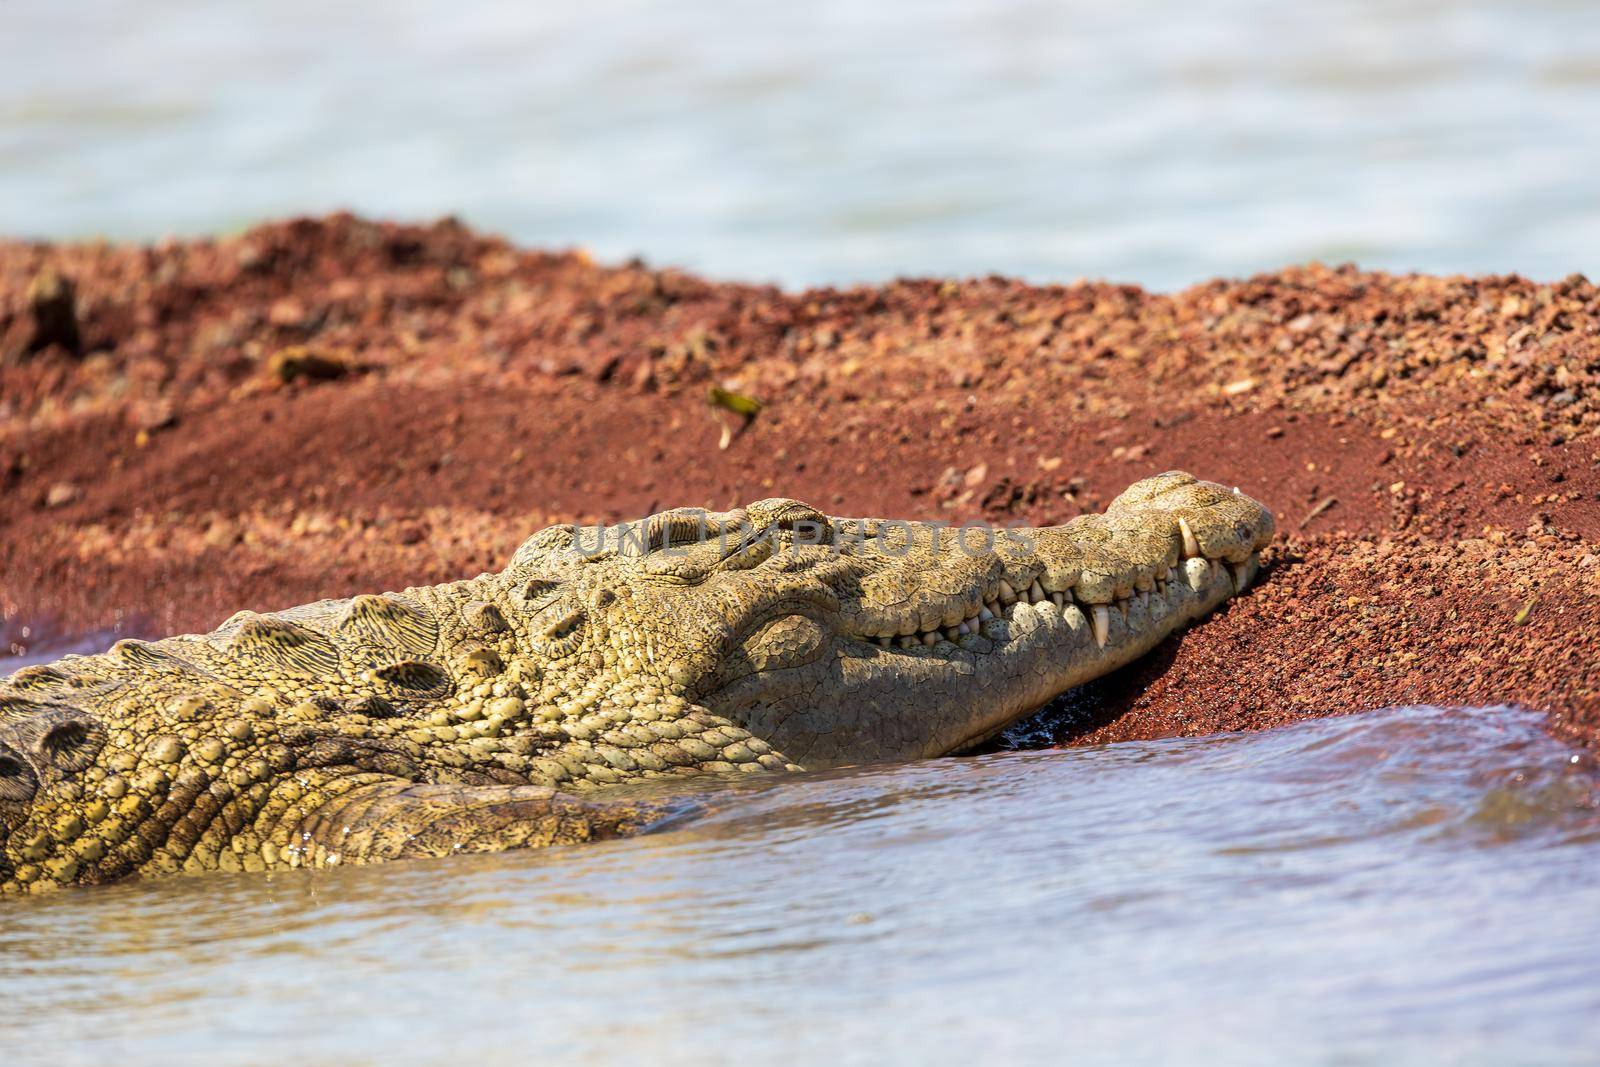 nile crocodile partially on bank. Crocodylus niloticus, largest fresh water crocodile in Africa, is panting and resting on ground. Chamo lake, Arba Minch Ethiopia, Africa wildlife